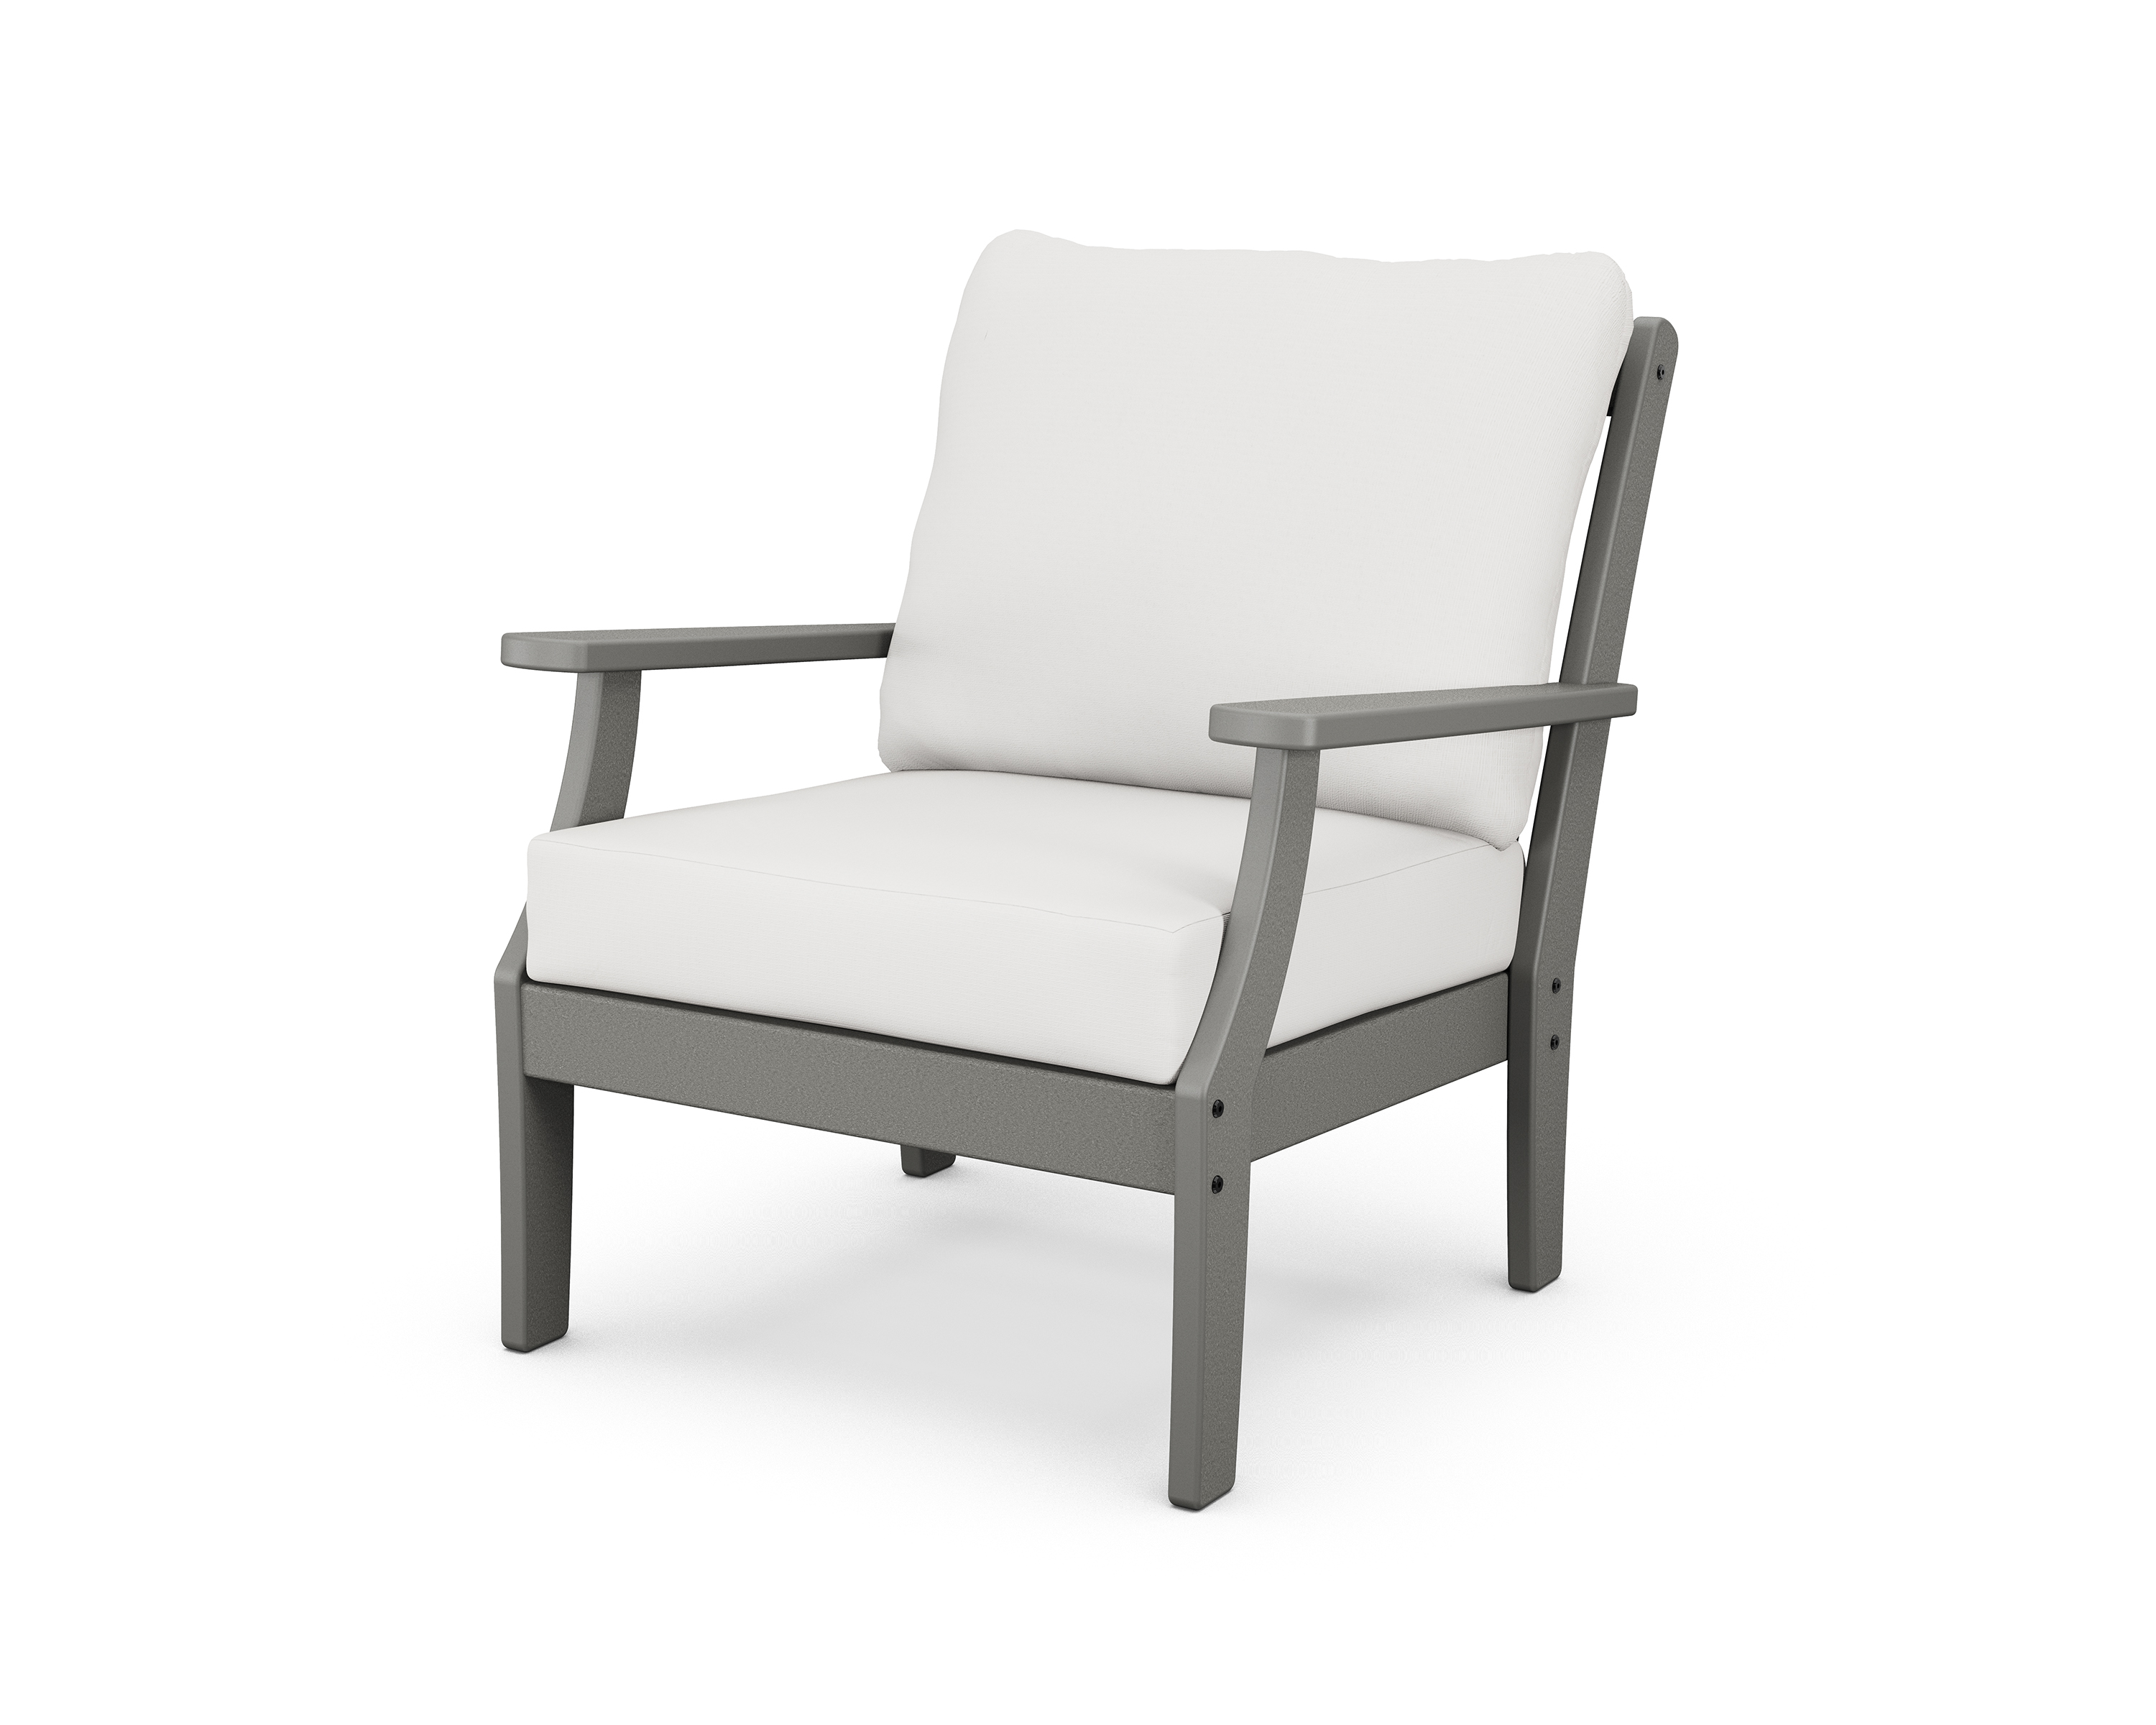 braxton deep seating chair in slate grey / textured linen product image